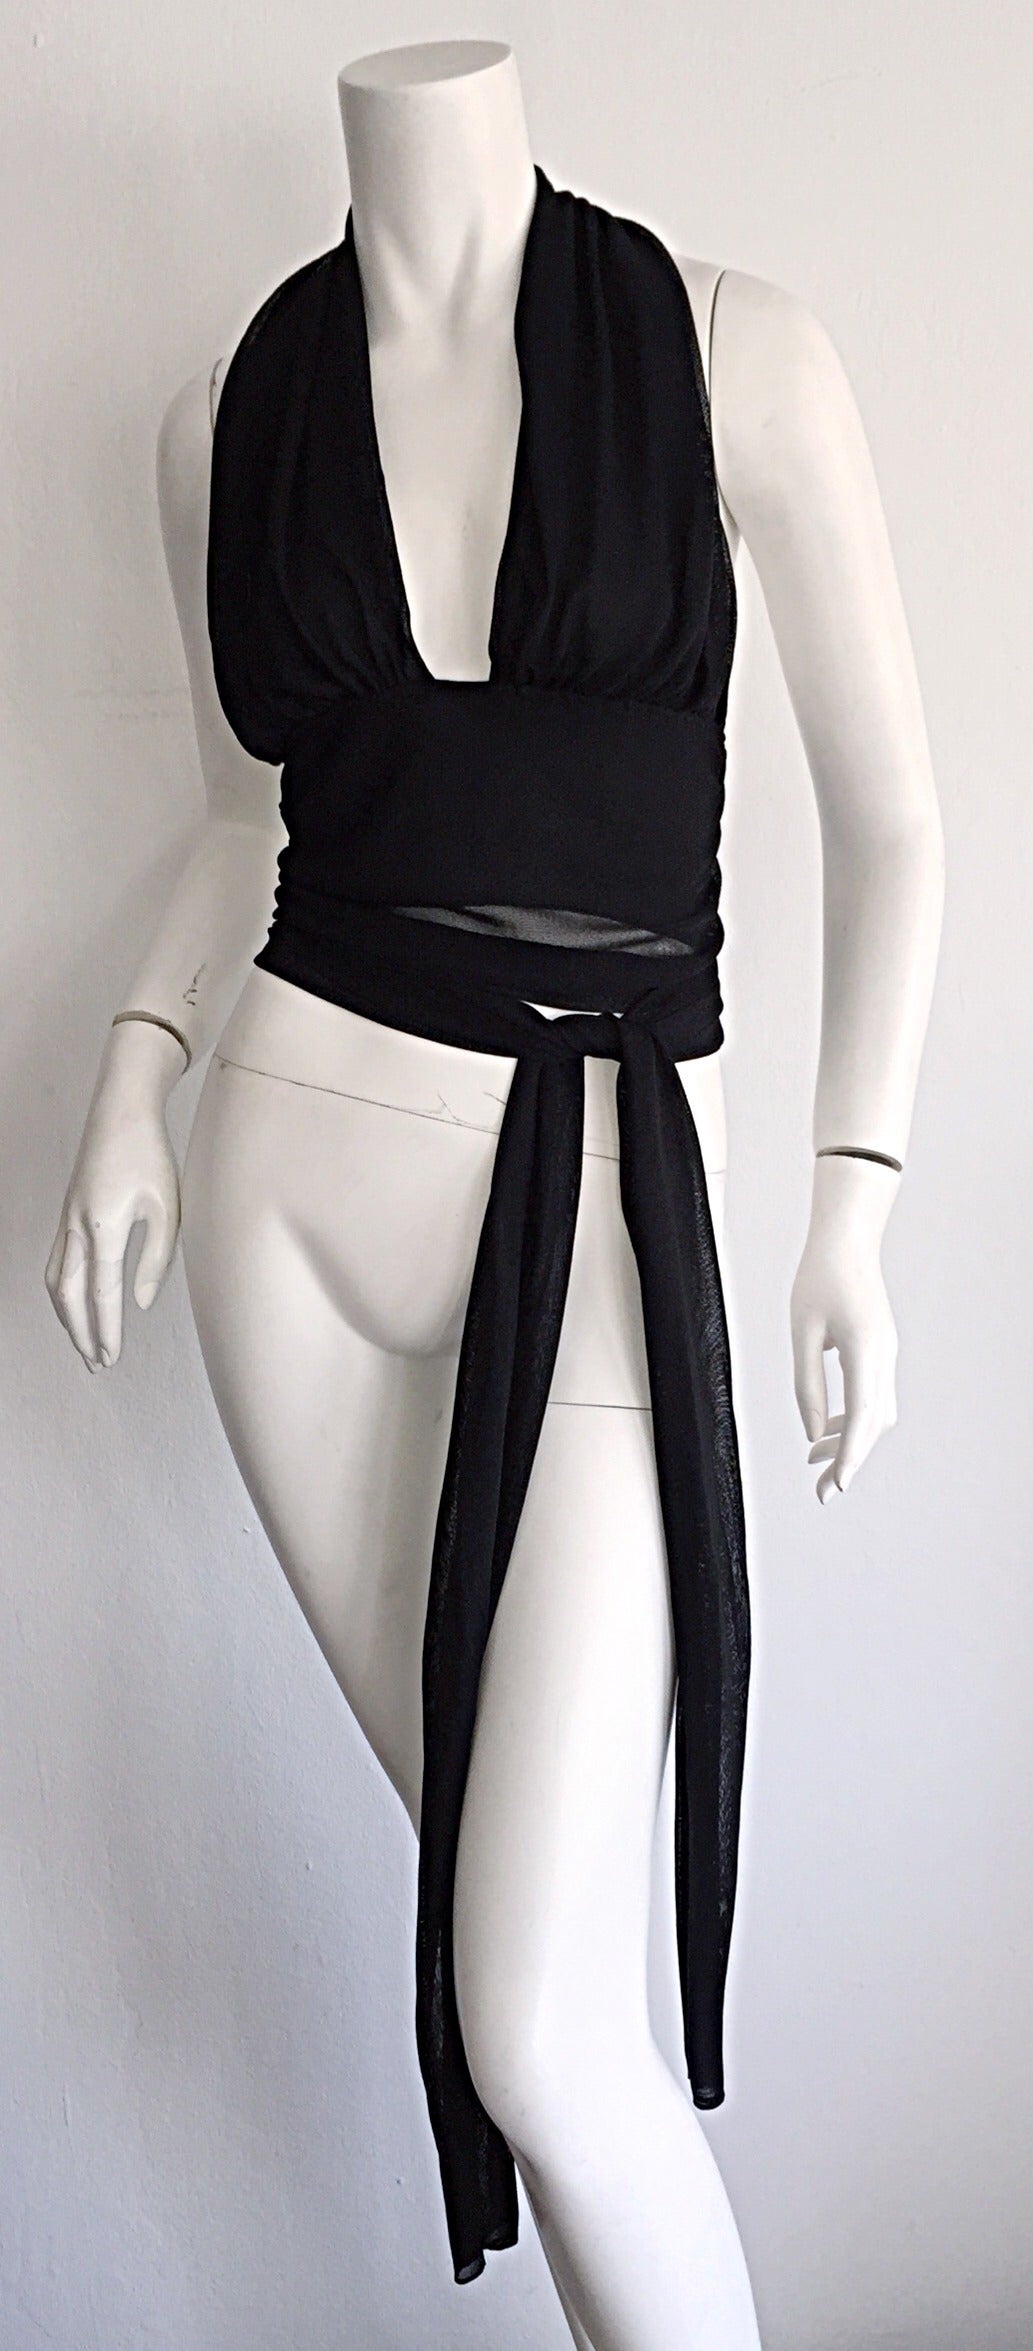 Sexy Vintage Donna Karan 'Plunging' halter top! Can be worn a number of ways...with sash tied in the front, or back. Layers and layers of fabric, that drape the bodice wonderfully! Can easily be dressed up or down. Looks great with shorts, trousers,